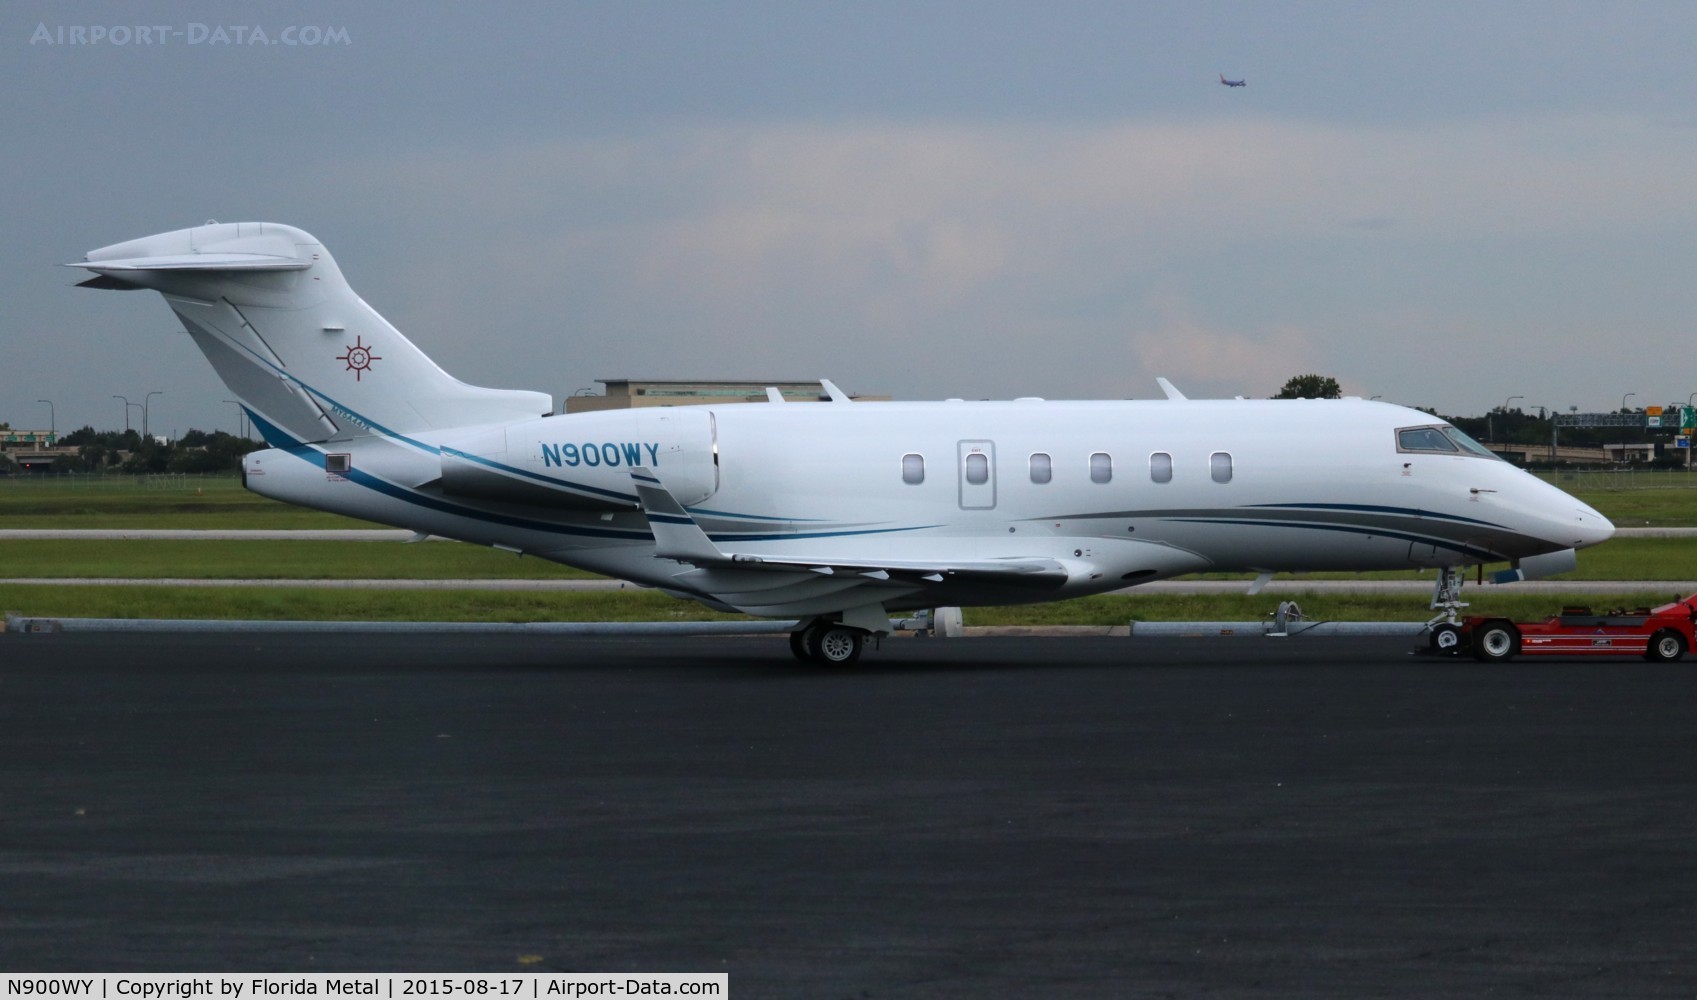 N900WY, 2004 Bombardier Challenger 300 (BD-100-1A10) C/N 20035, Challenger 300